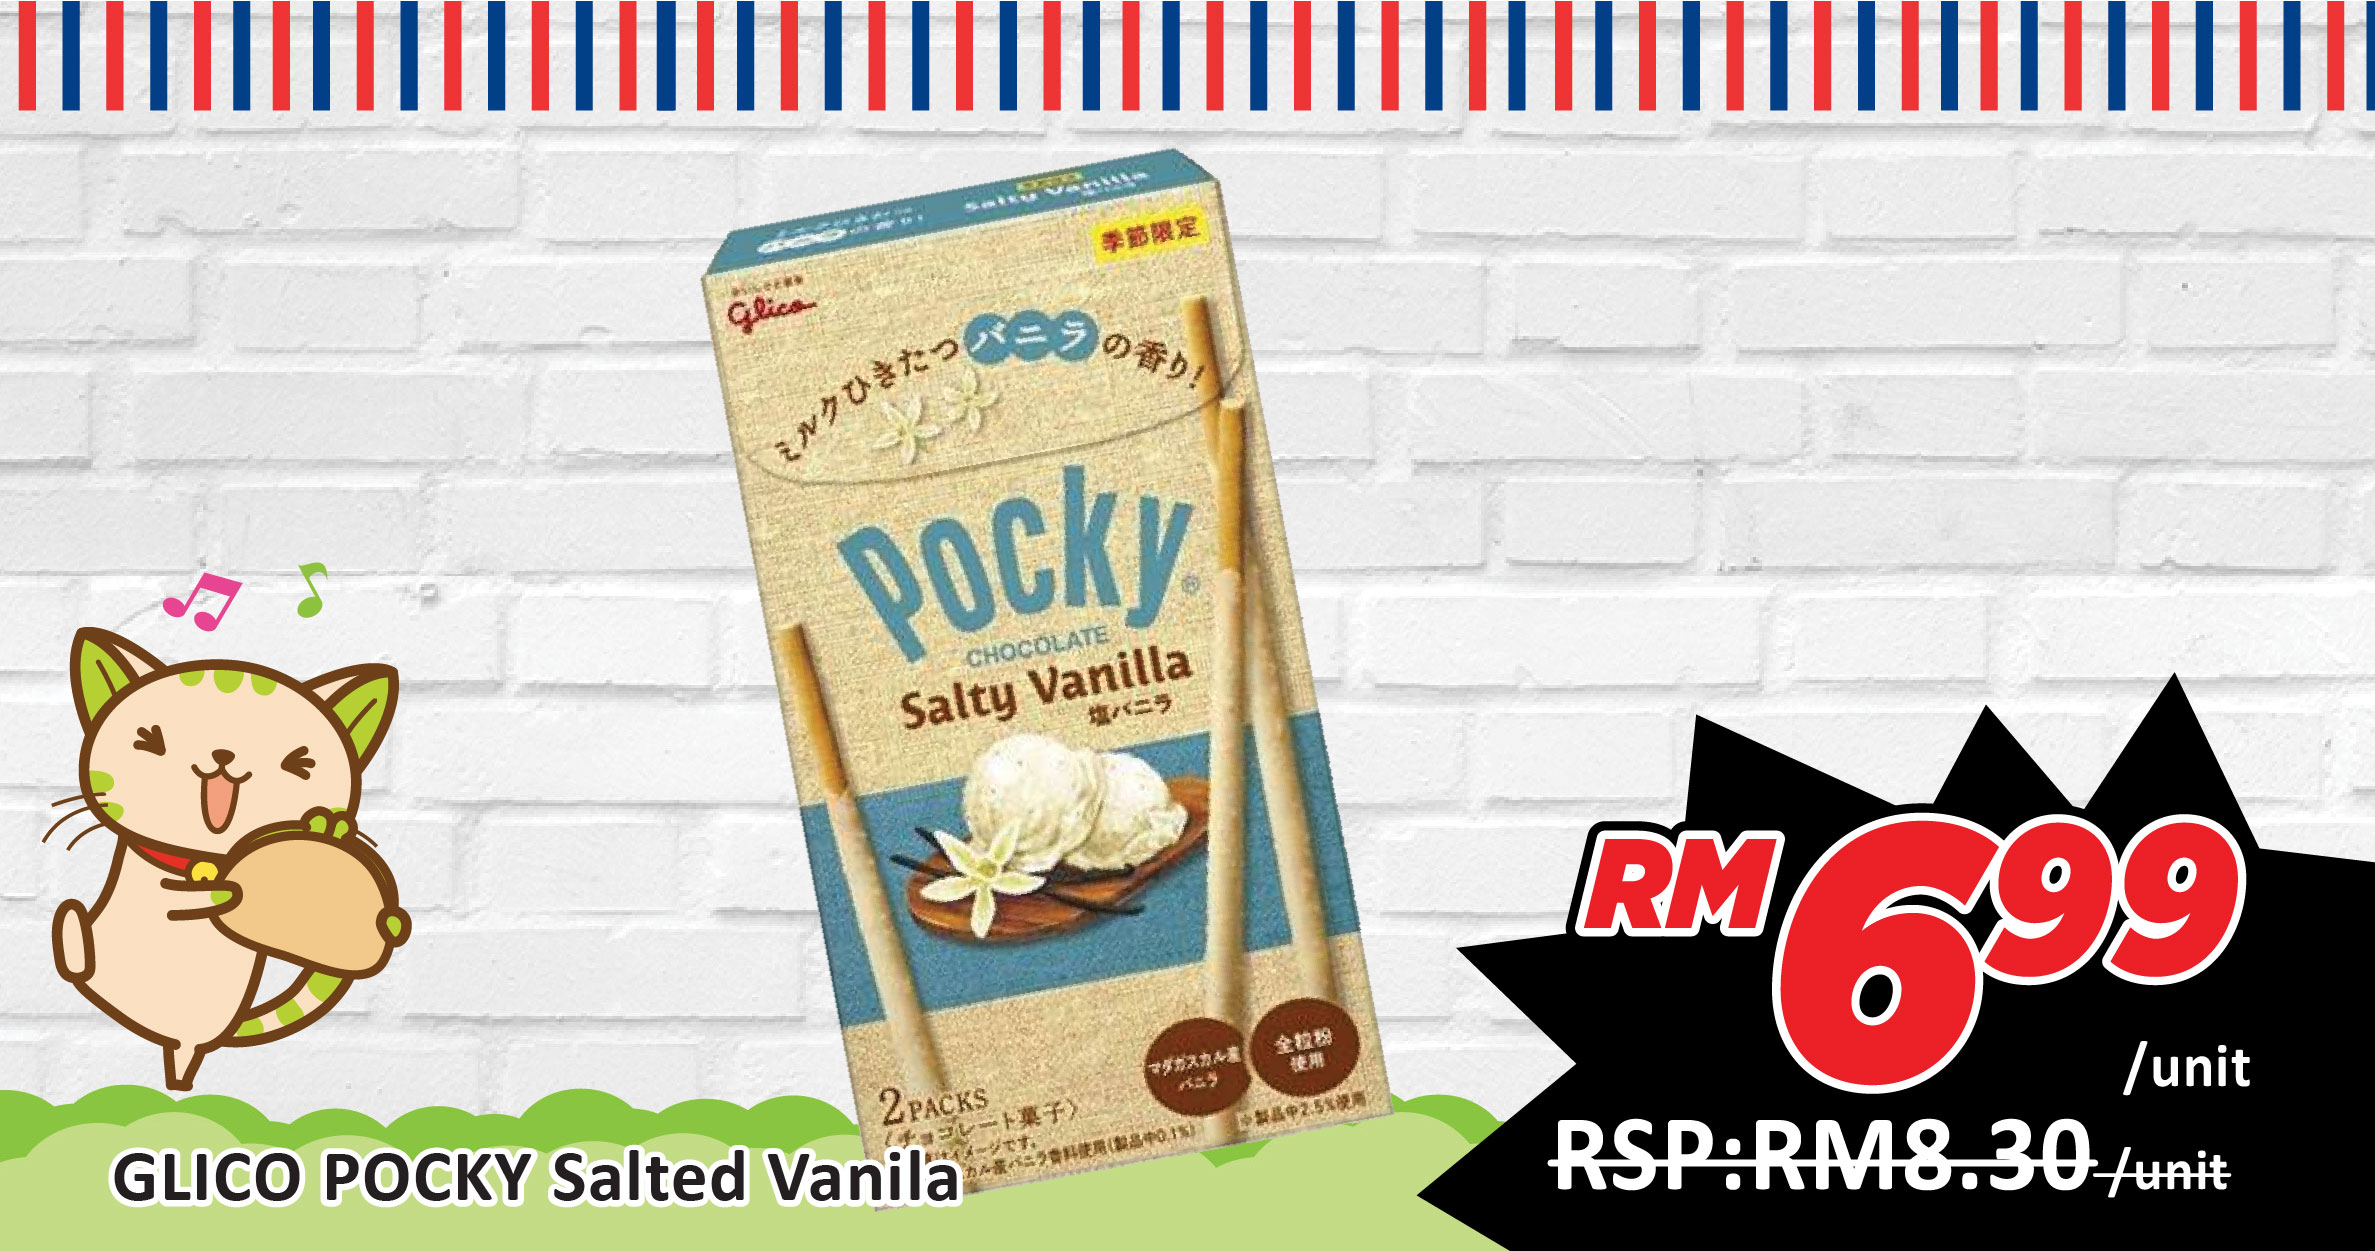 https://www.alpropharmacy.com/oneclick/product/glico-pocky-salted-vanila-26-4g-seasonal-limited/